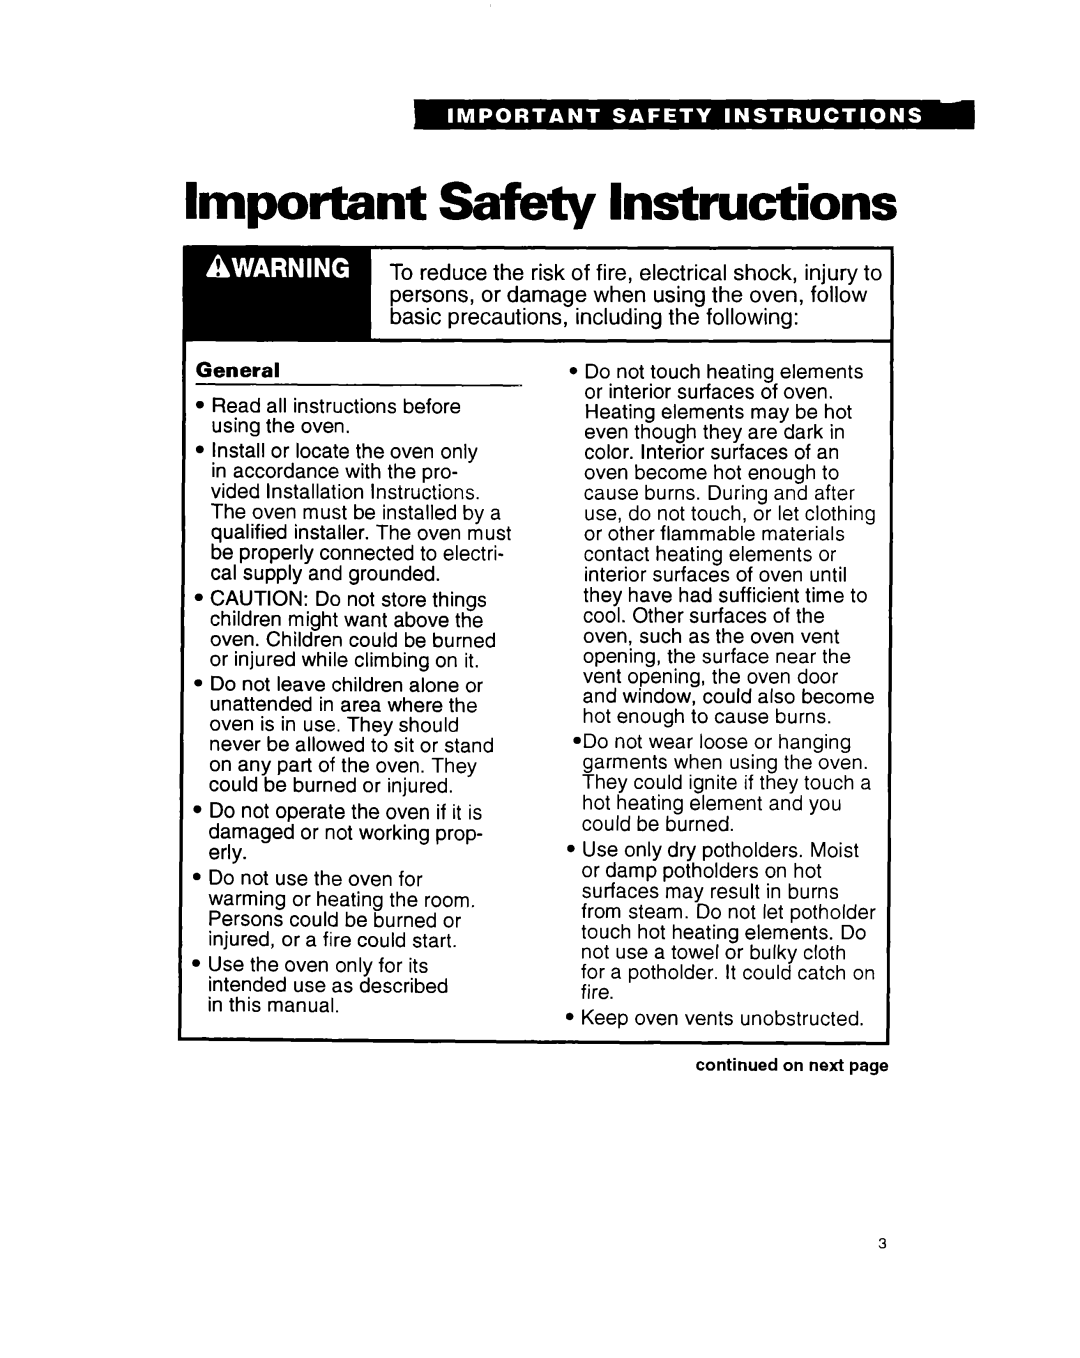 Whirlpool RB220PXB Important Safety Instructions, damaged or not working prop, intended use as described 